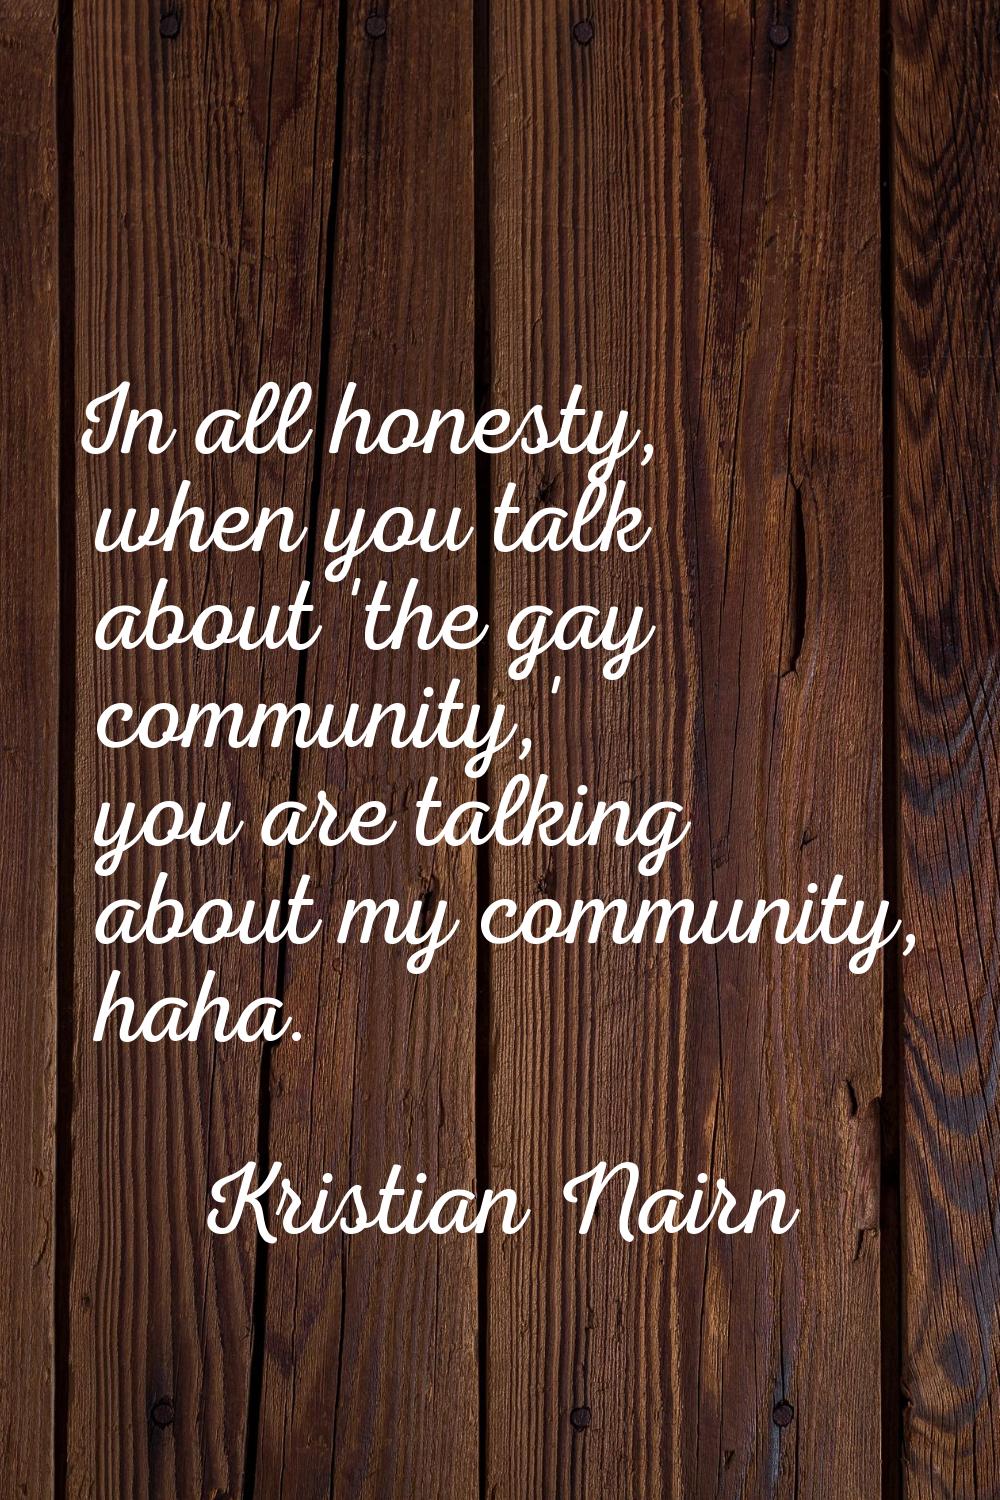 In all honesty, when you talk about 'the gay community,' you are talking about my community, haha.